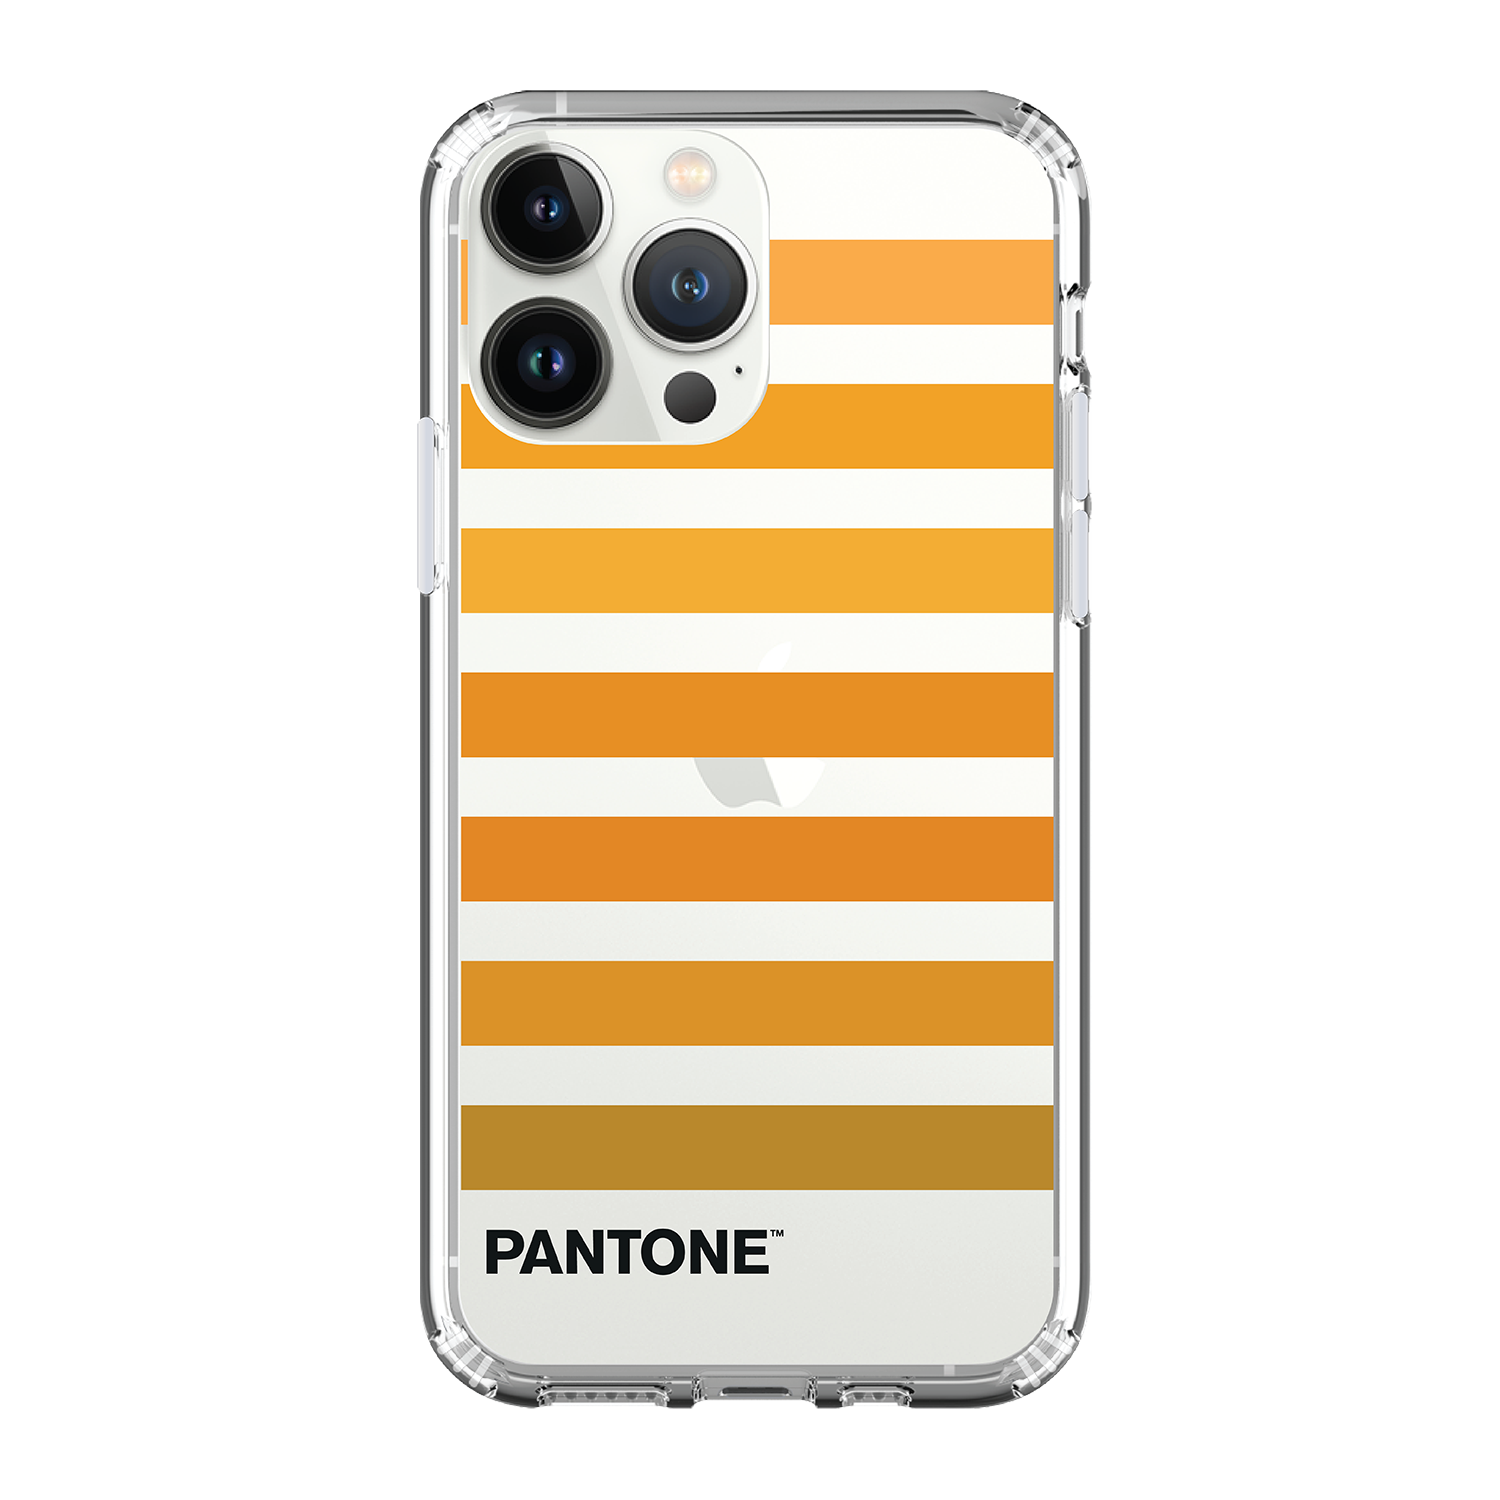 PANTONE Clear Case / iPhone Case / Android Case / Samsung Case 正版授權 全包邊氣囊防撞手機殼 (PE06)